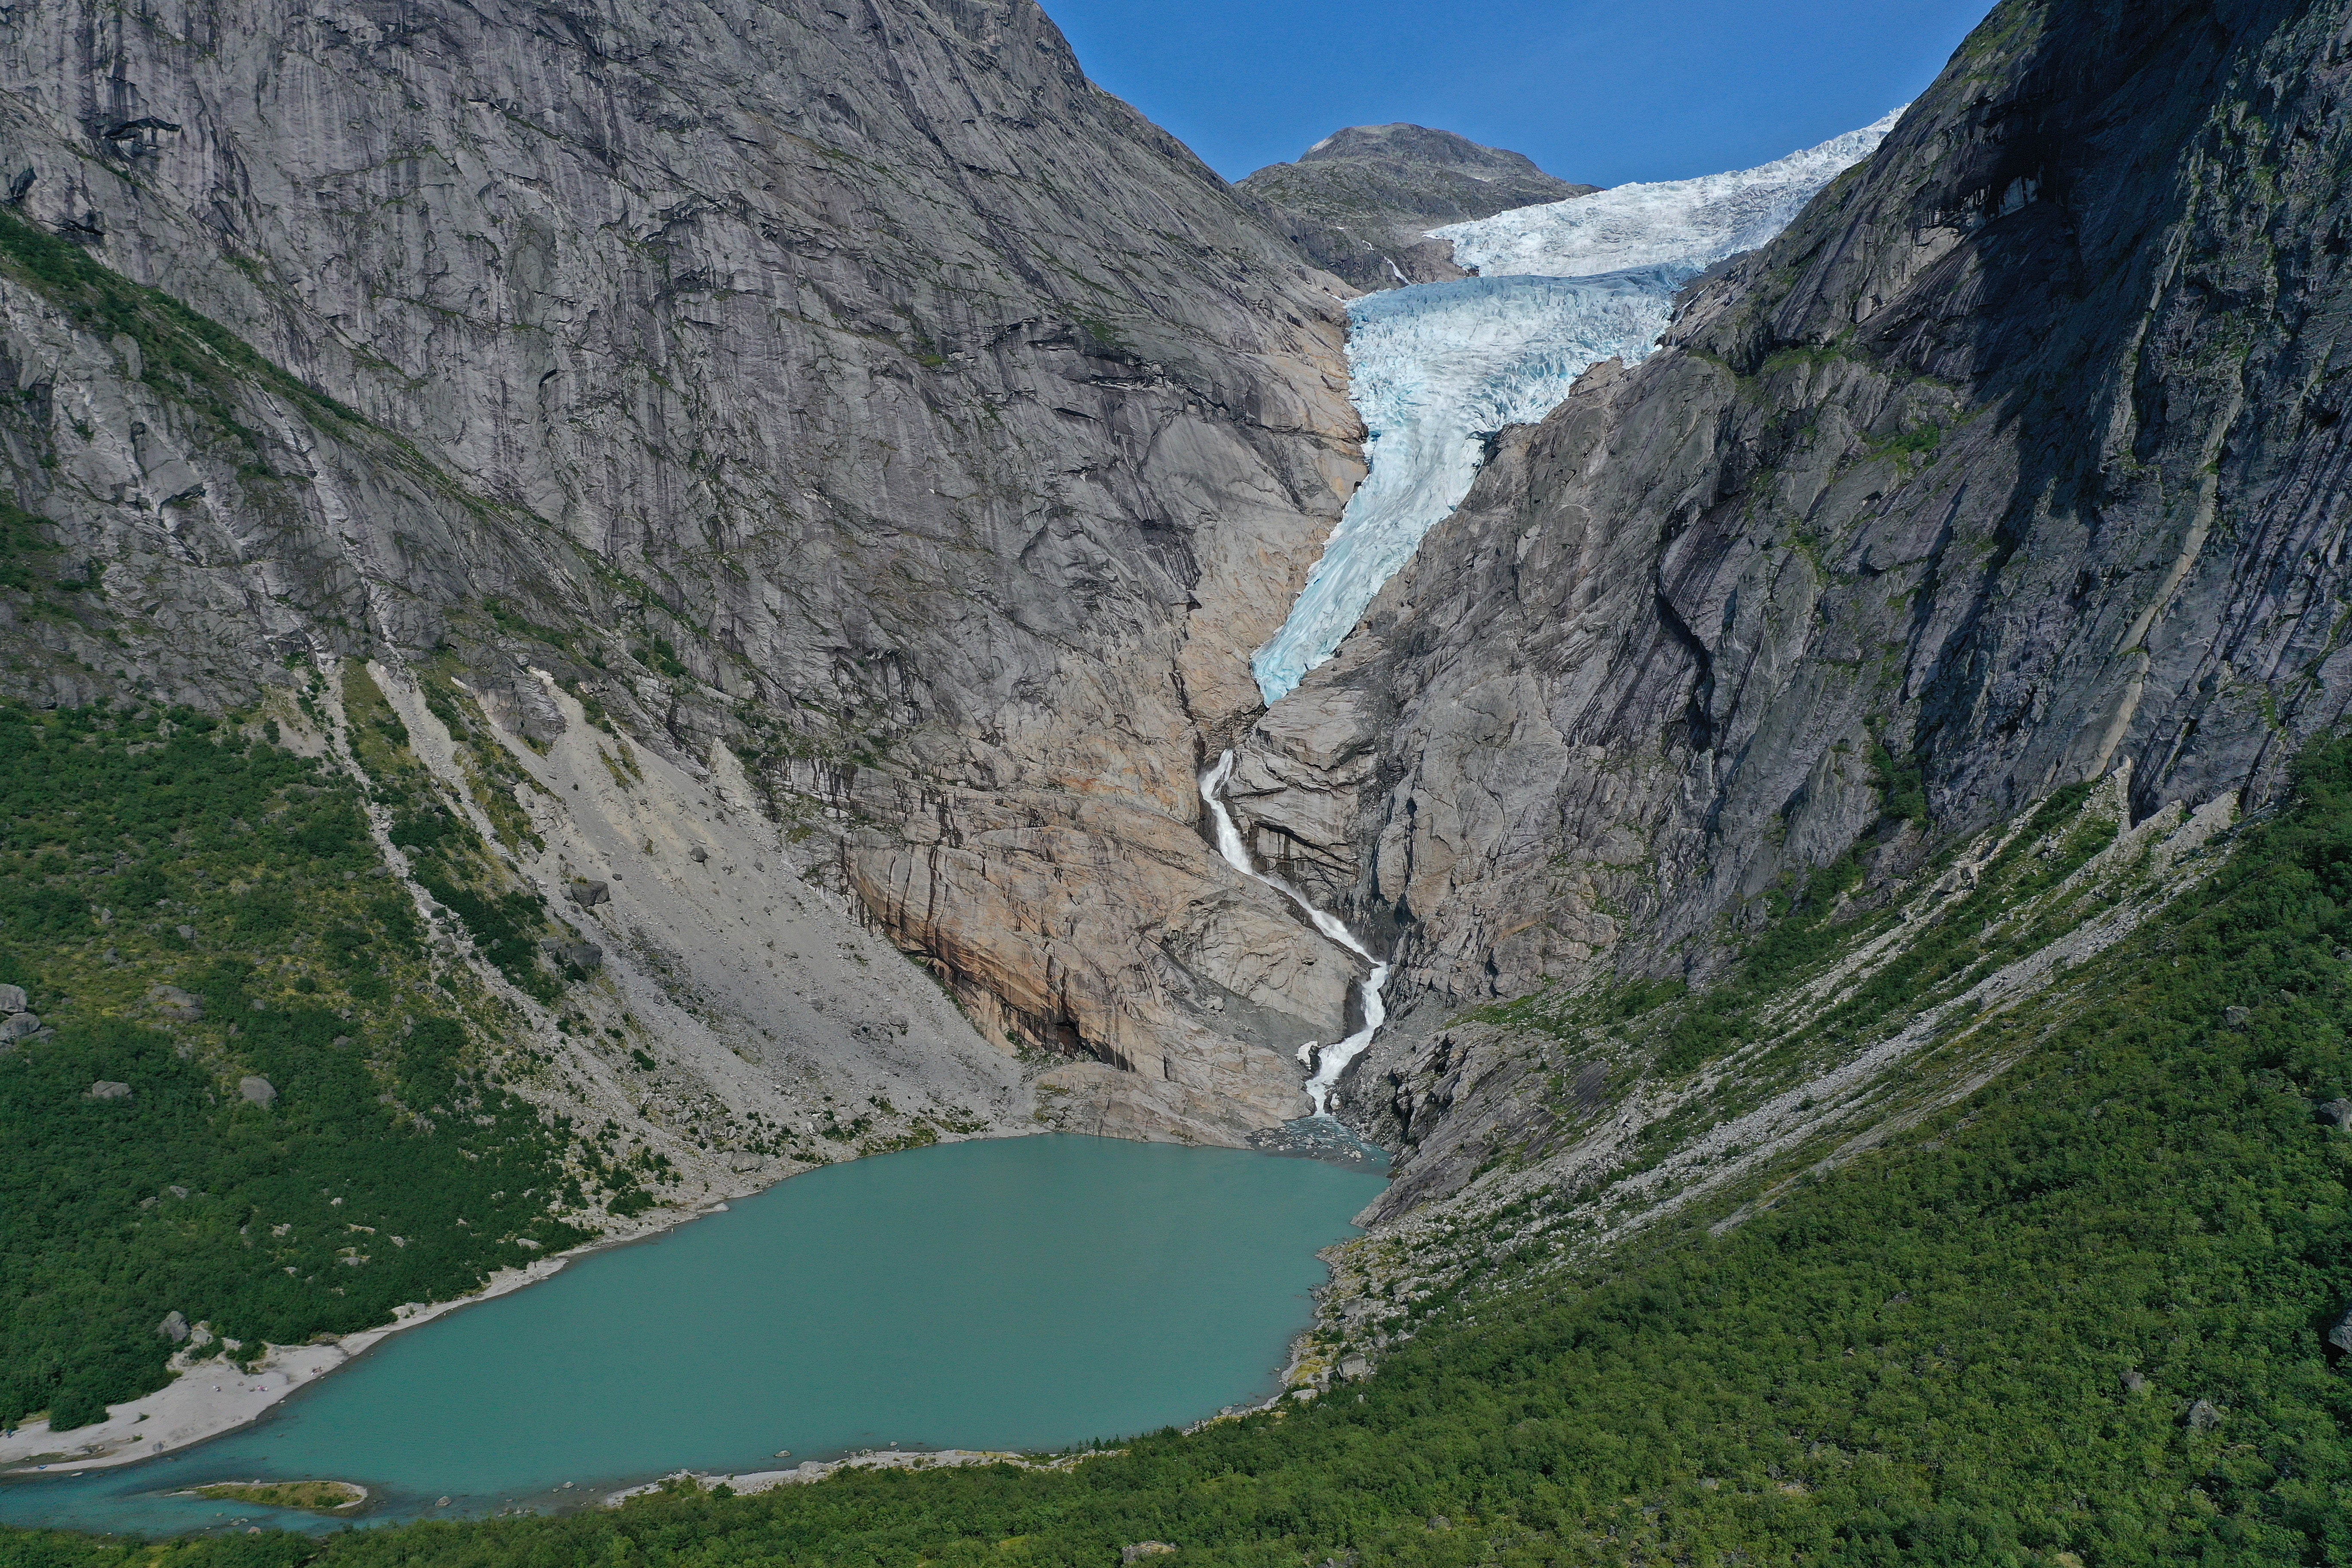 The world’s glaciers are retreating at an accelerated rate, the study says